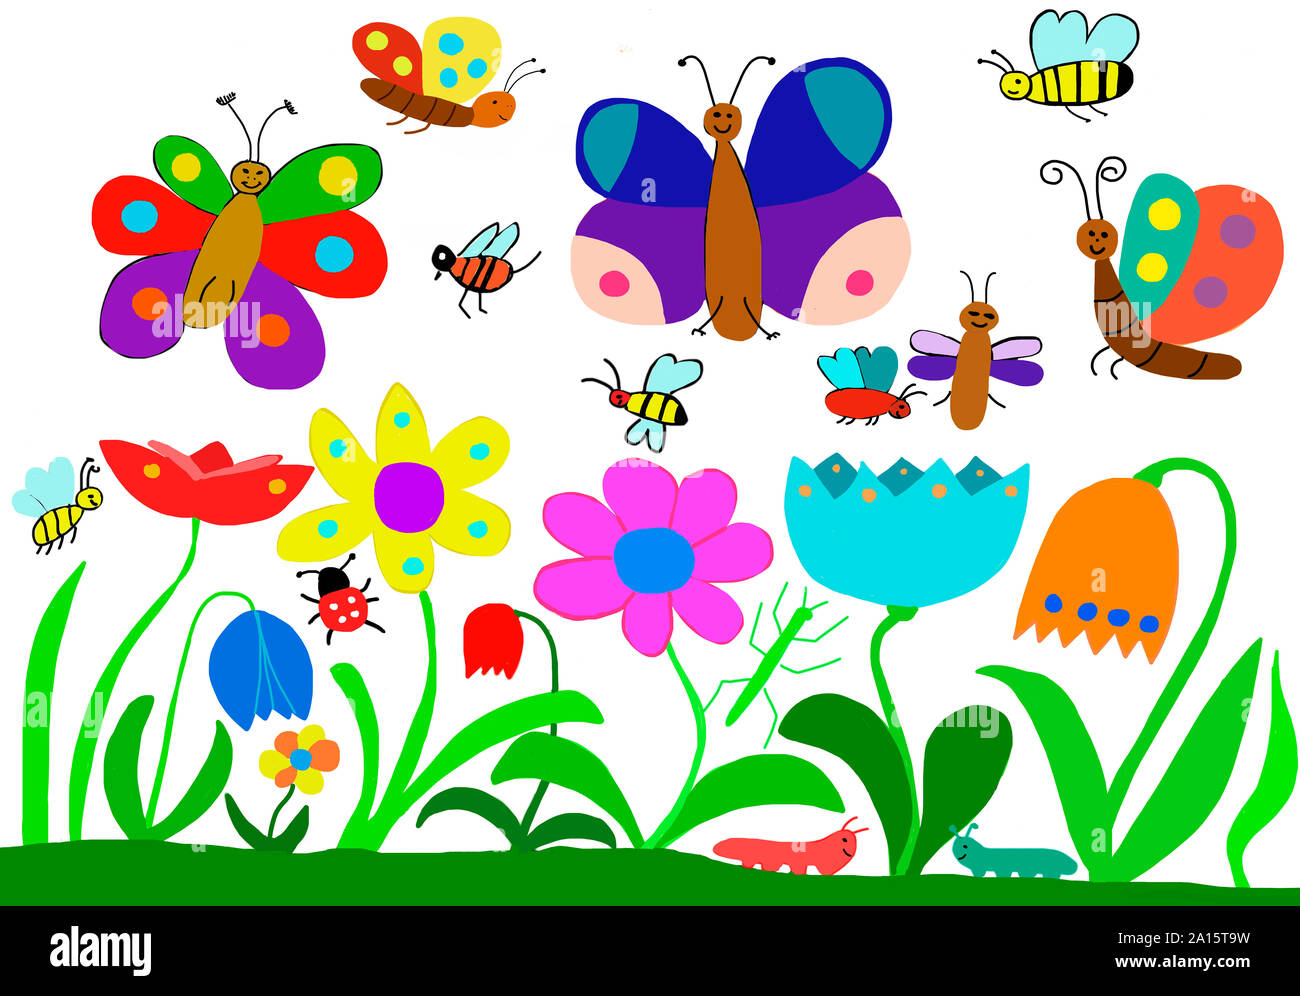 Child's drawing of insects on flower meadow Stock Photo - Alamy